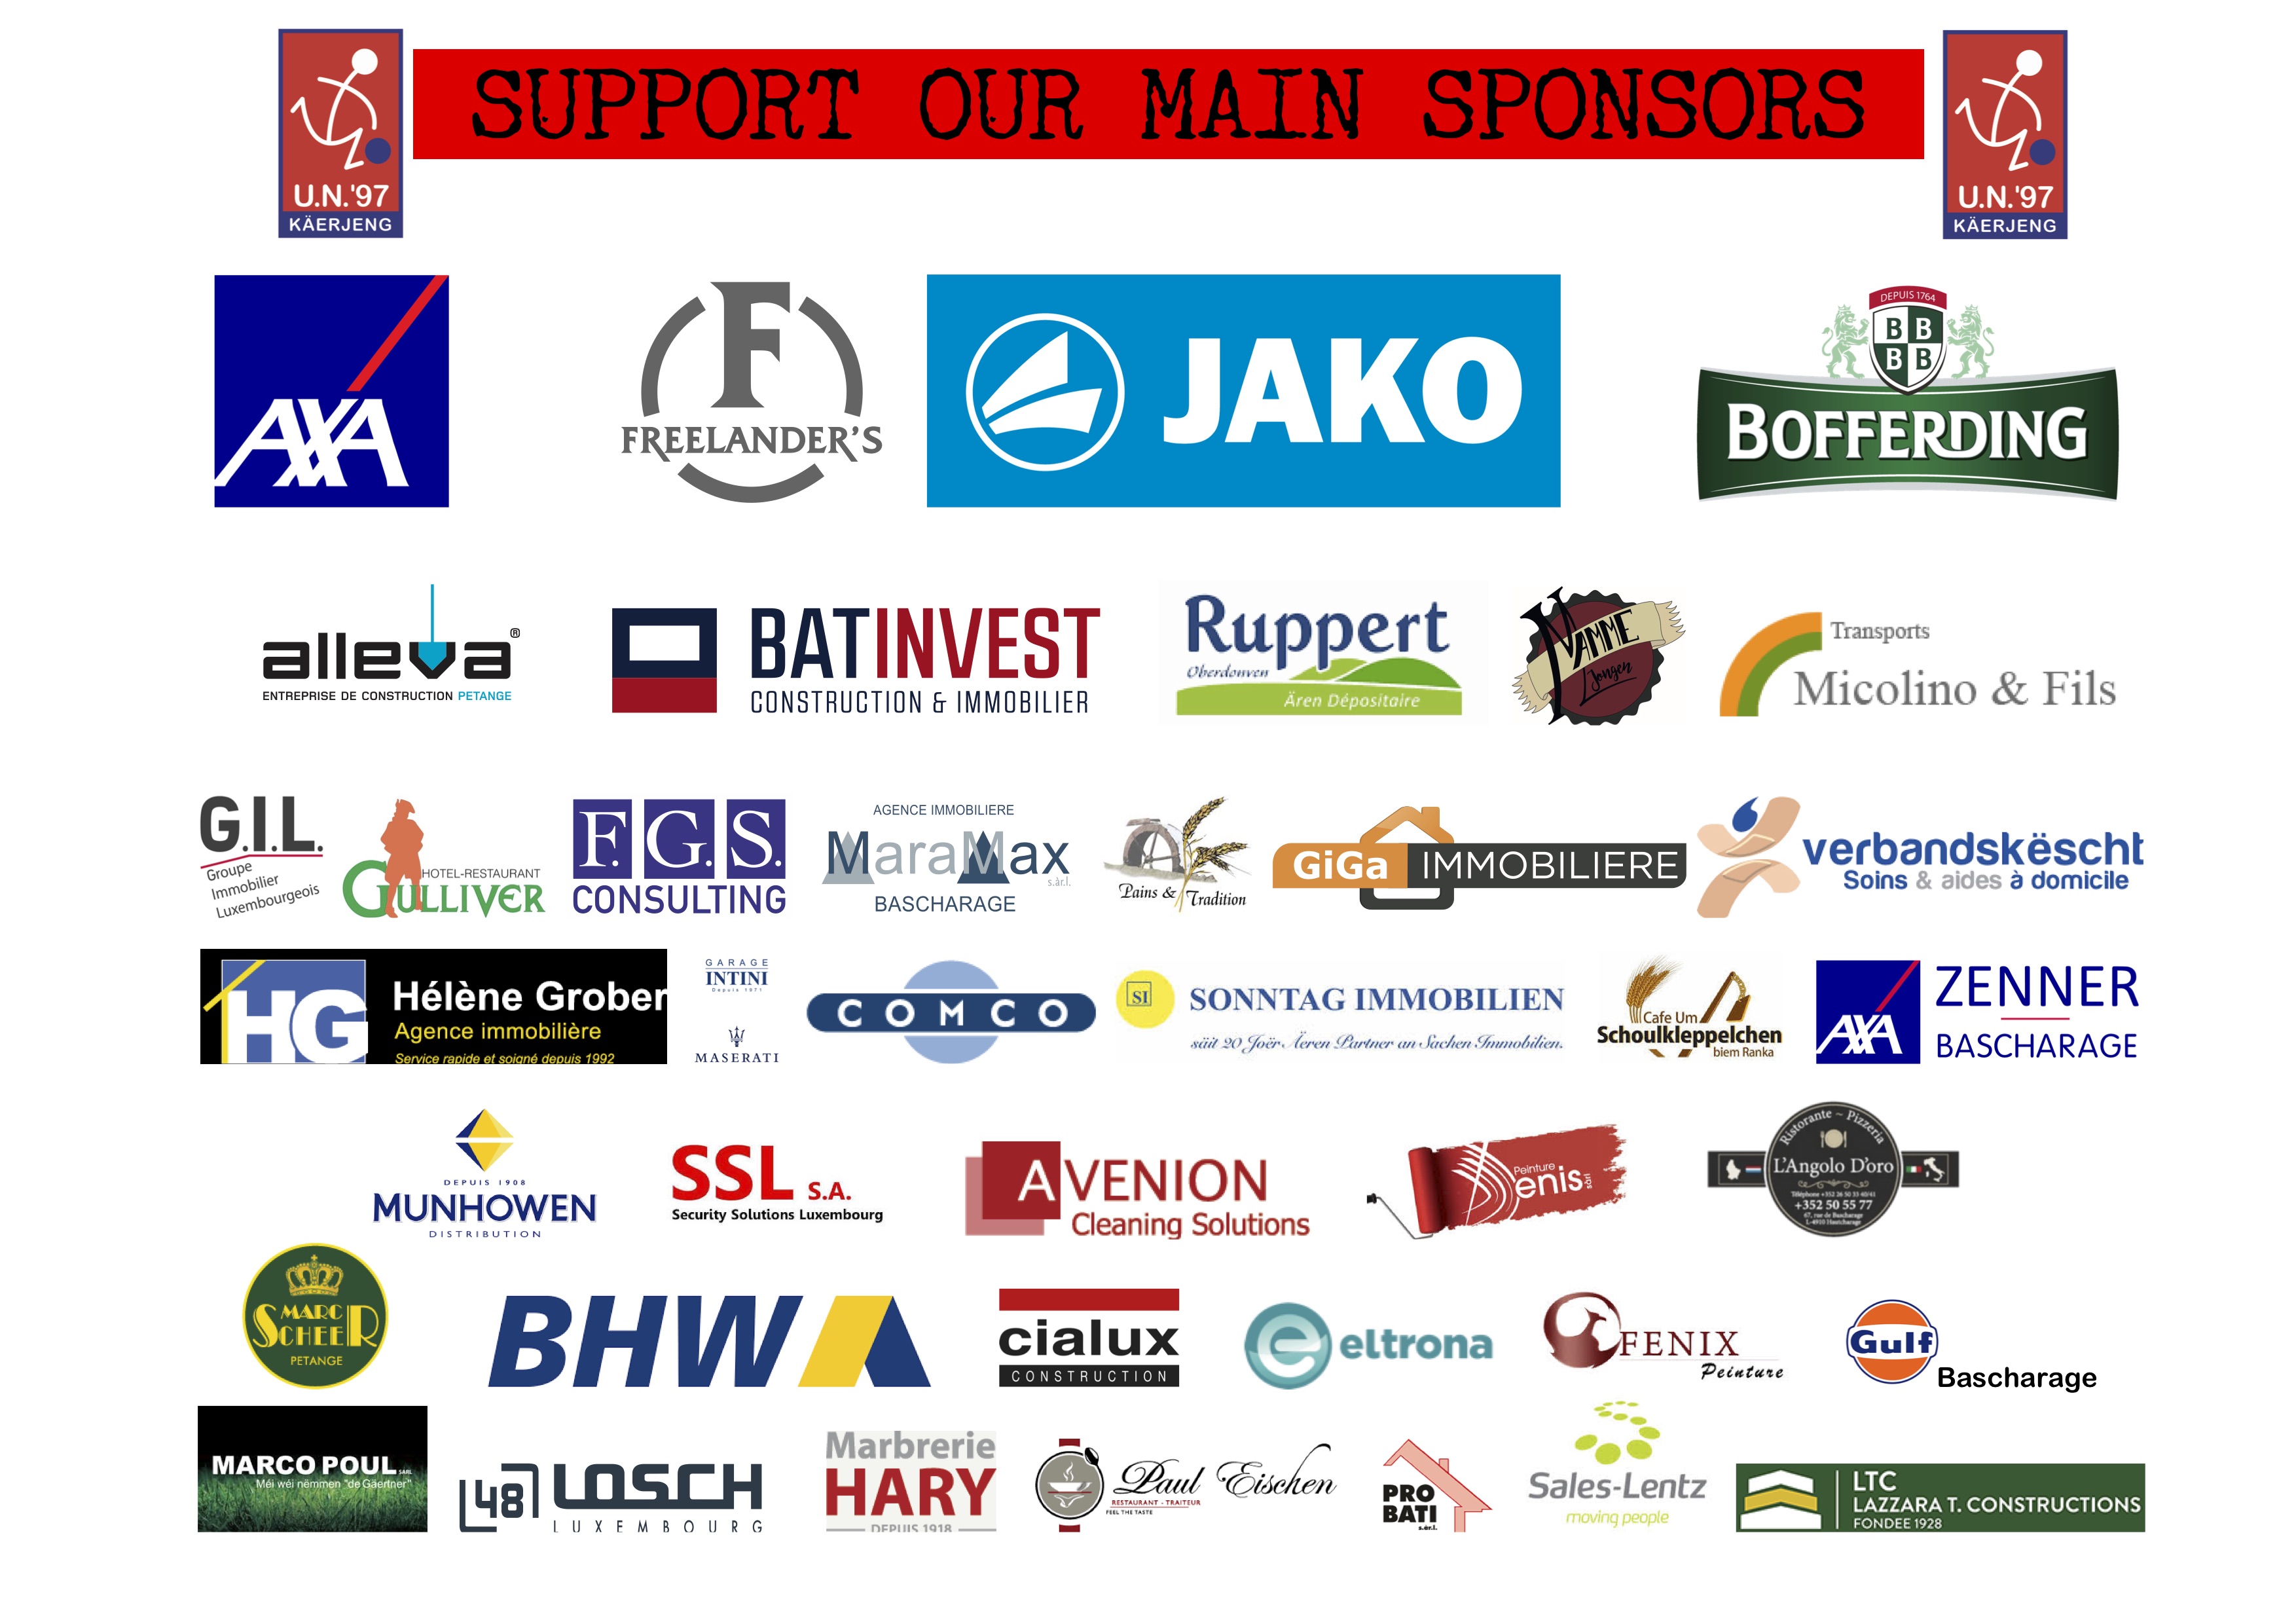 *** SUPPORT OUR SPONSORS ***